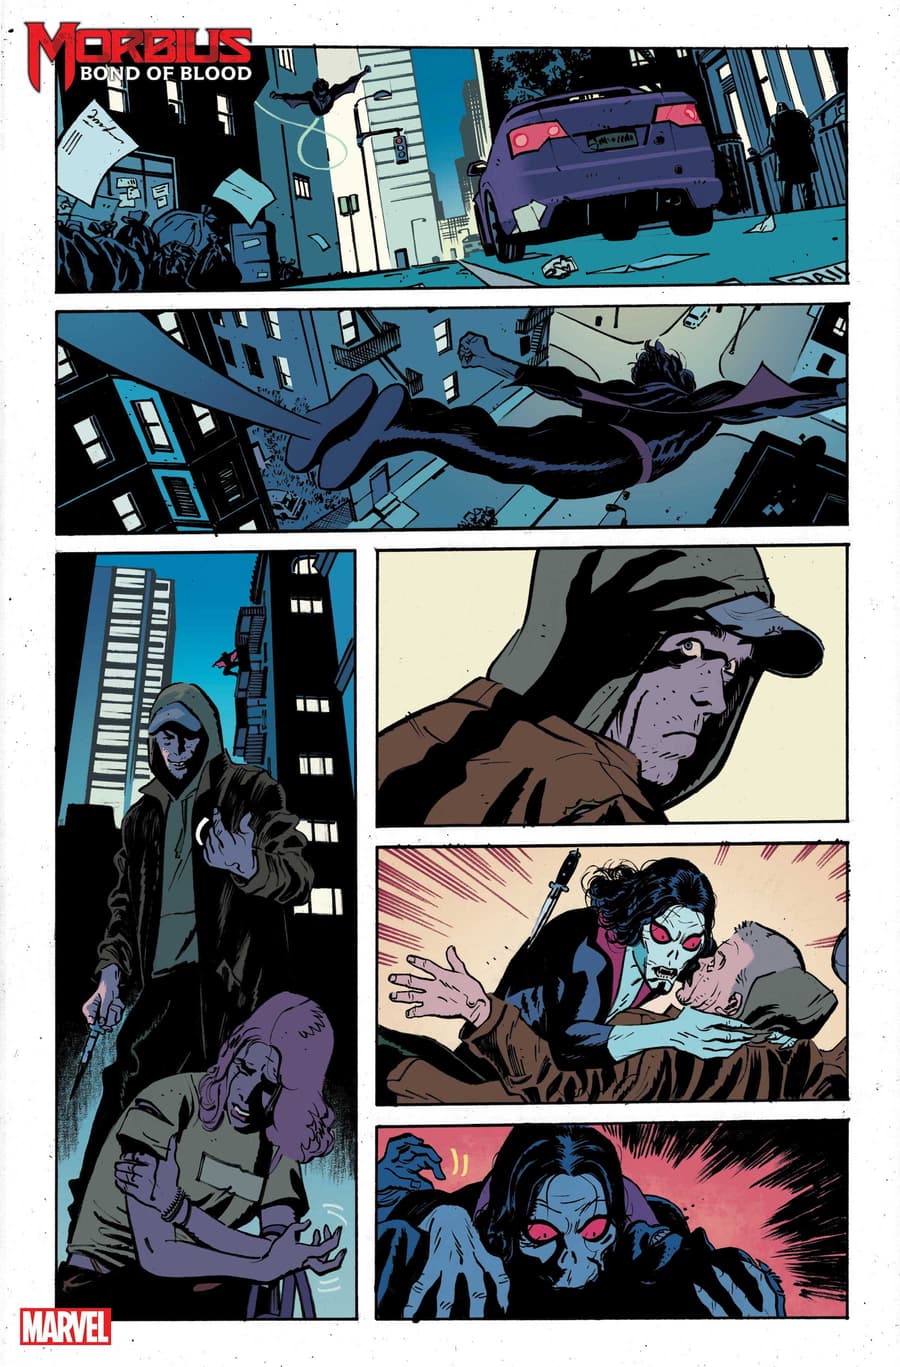 MORBIUS: BOND OF BLOOD #1 preview art by Tom Reilly with colors by Chris O’Halloran